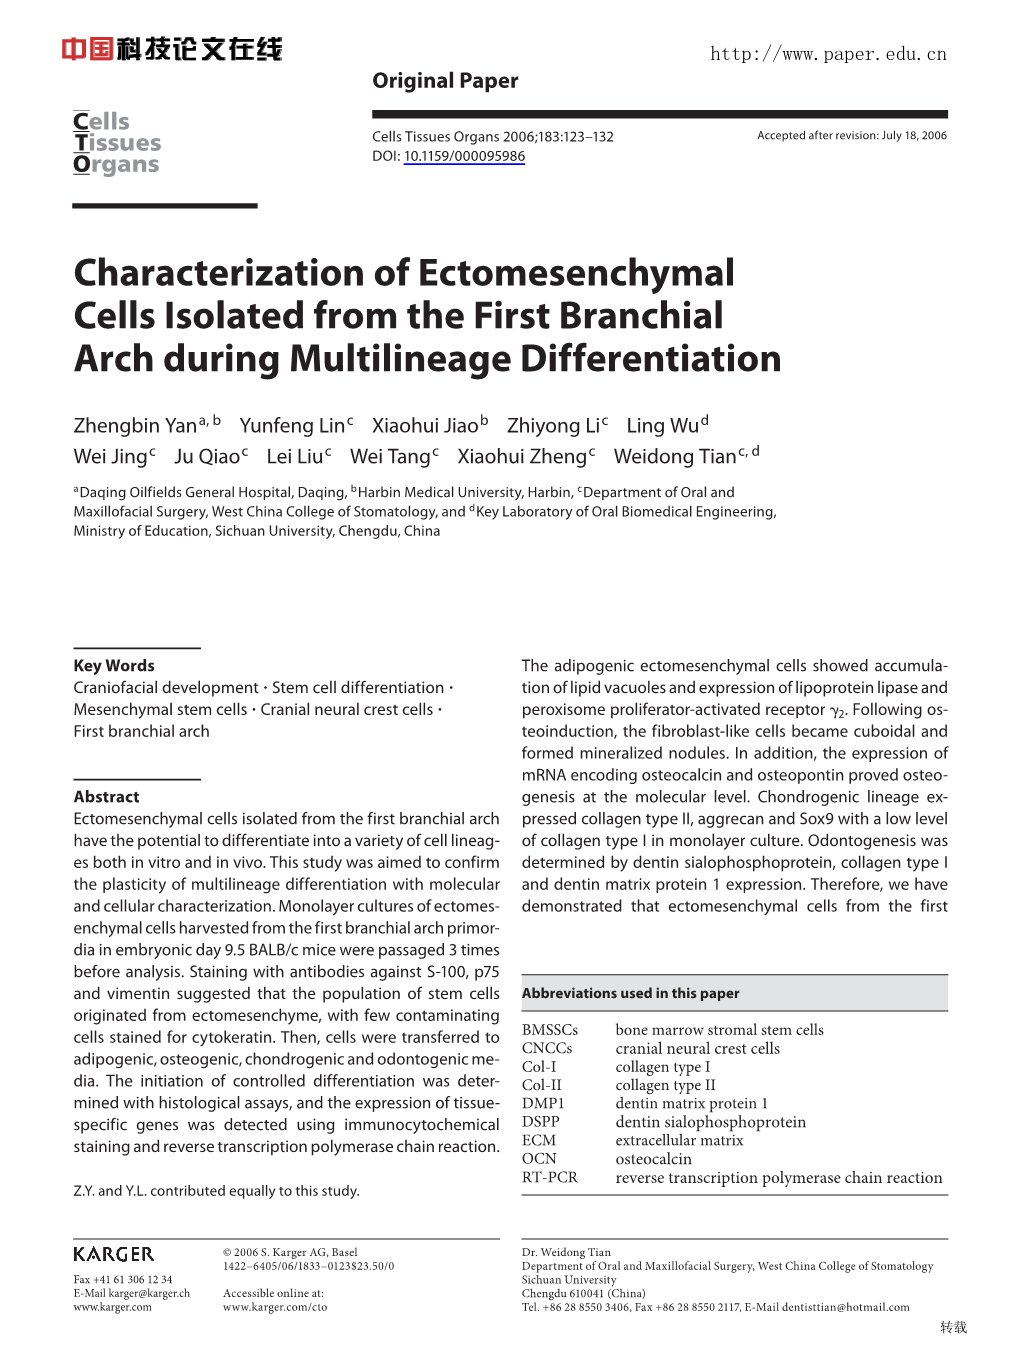 Characterization of Ectomesenchymal Cells Isolated from the First Branchial Arch During Multilineage Differentiation